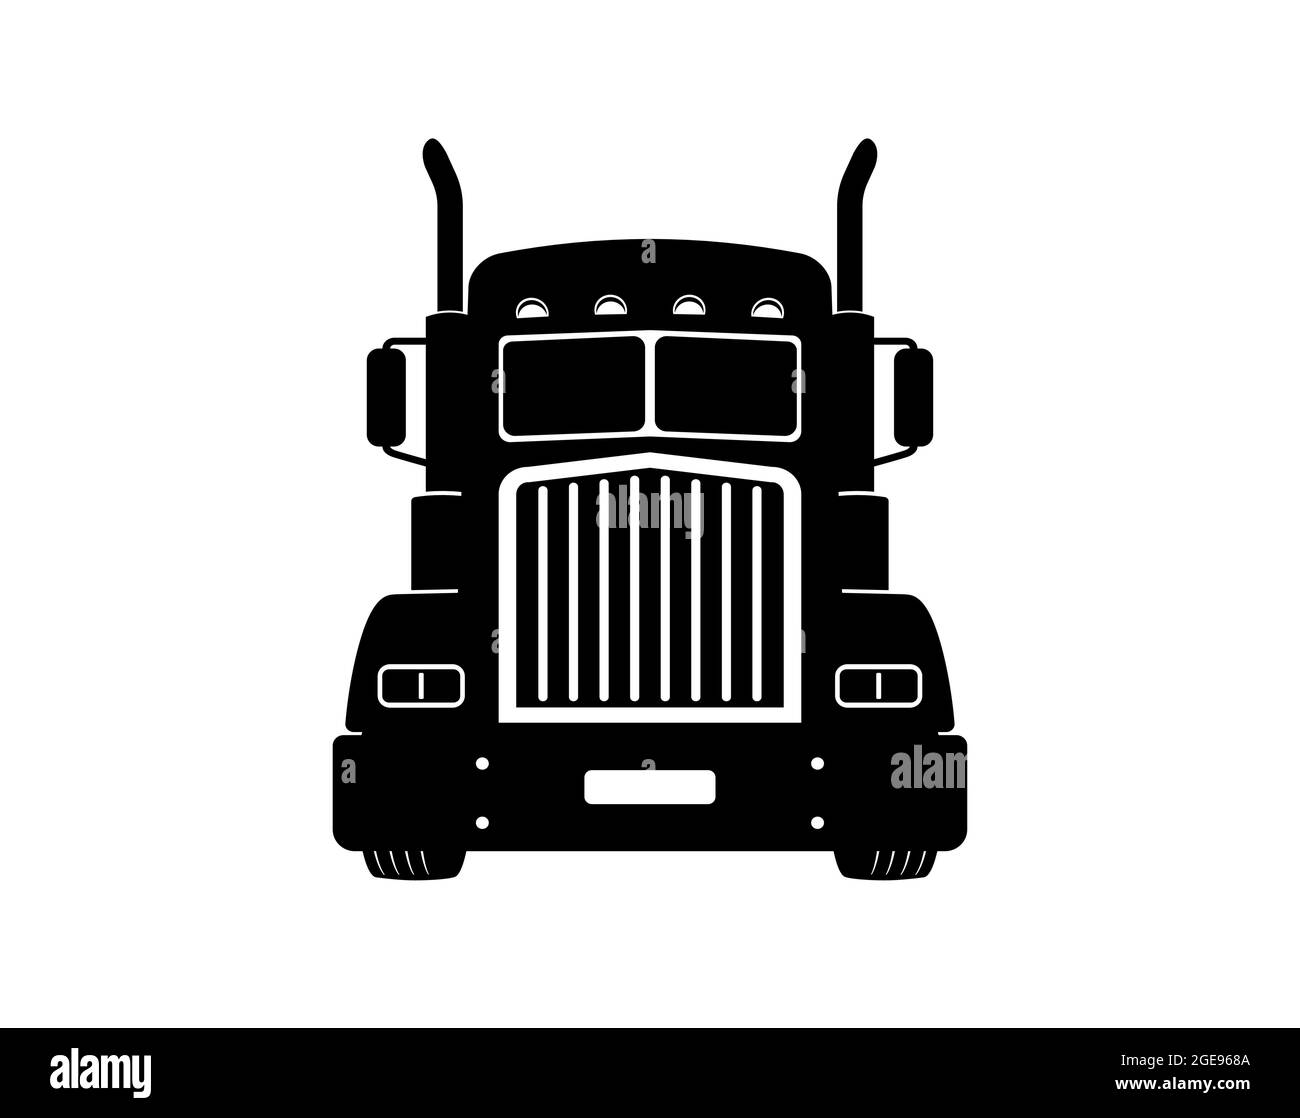 Semi truck. Vector Outline Lorry. White blank template for truck, semi-trailer for advertising, for coloring book. Stock Vector